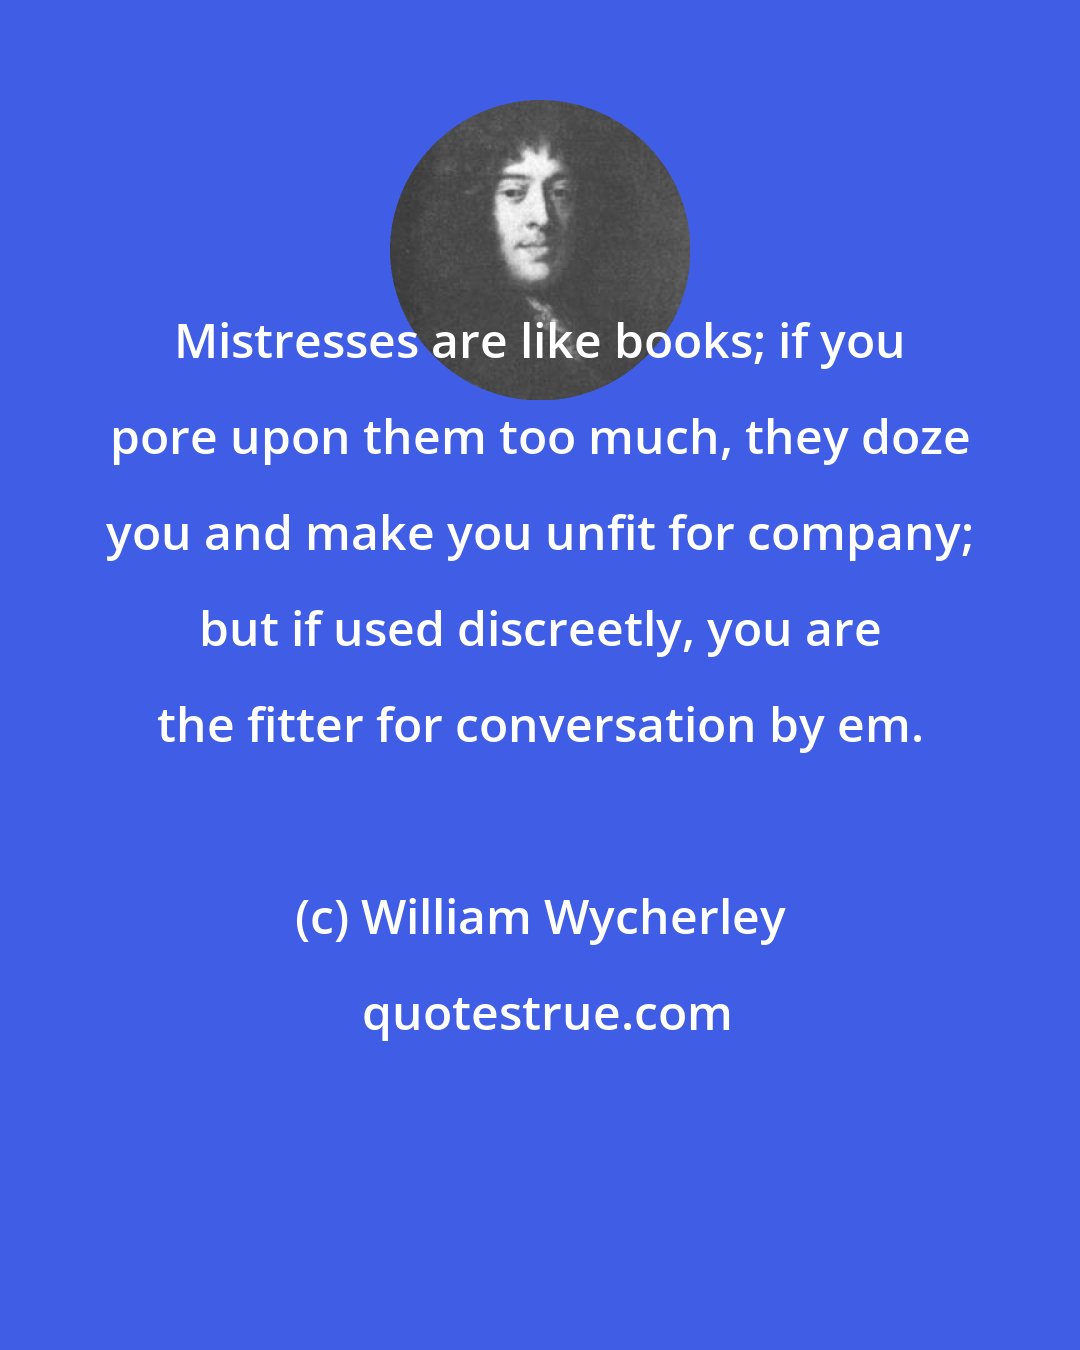 William Wycherley: Mistresses are like books; if you pore upon them too much, they doze you and make you unfit for company; but if used discreetly, you are the fitter for conversation by em.